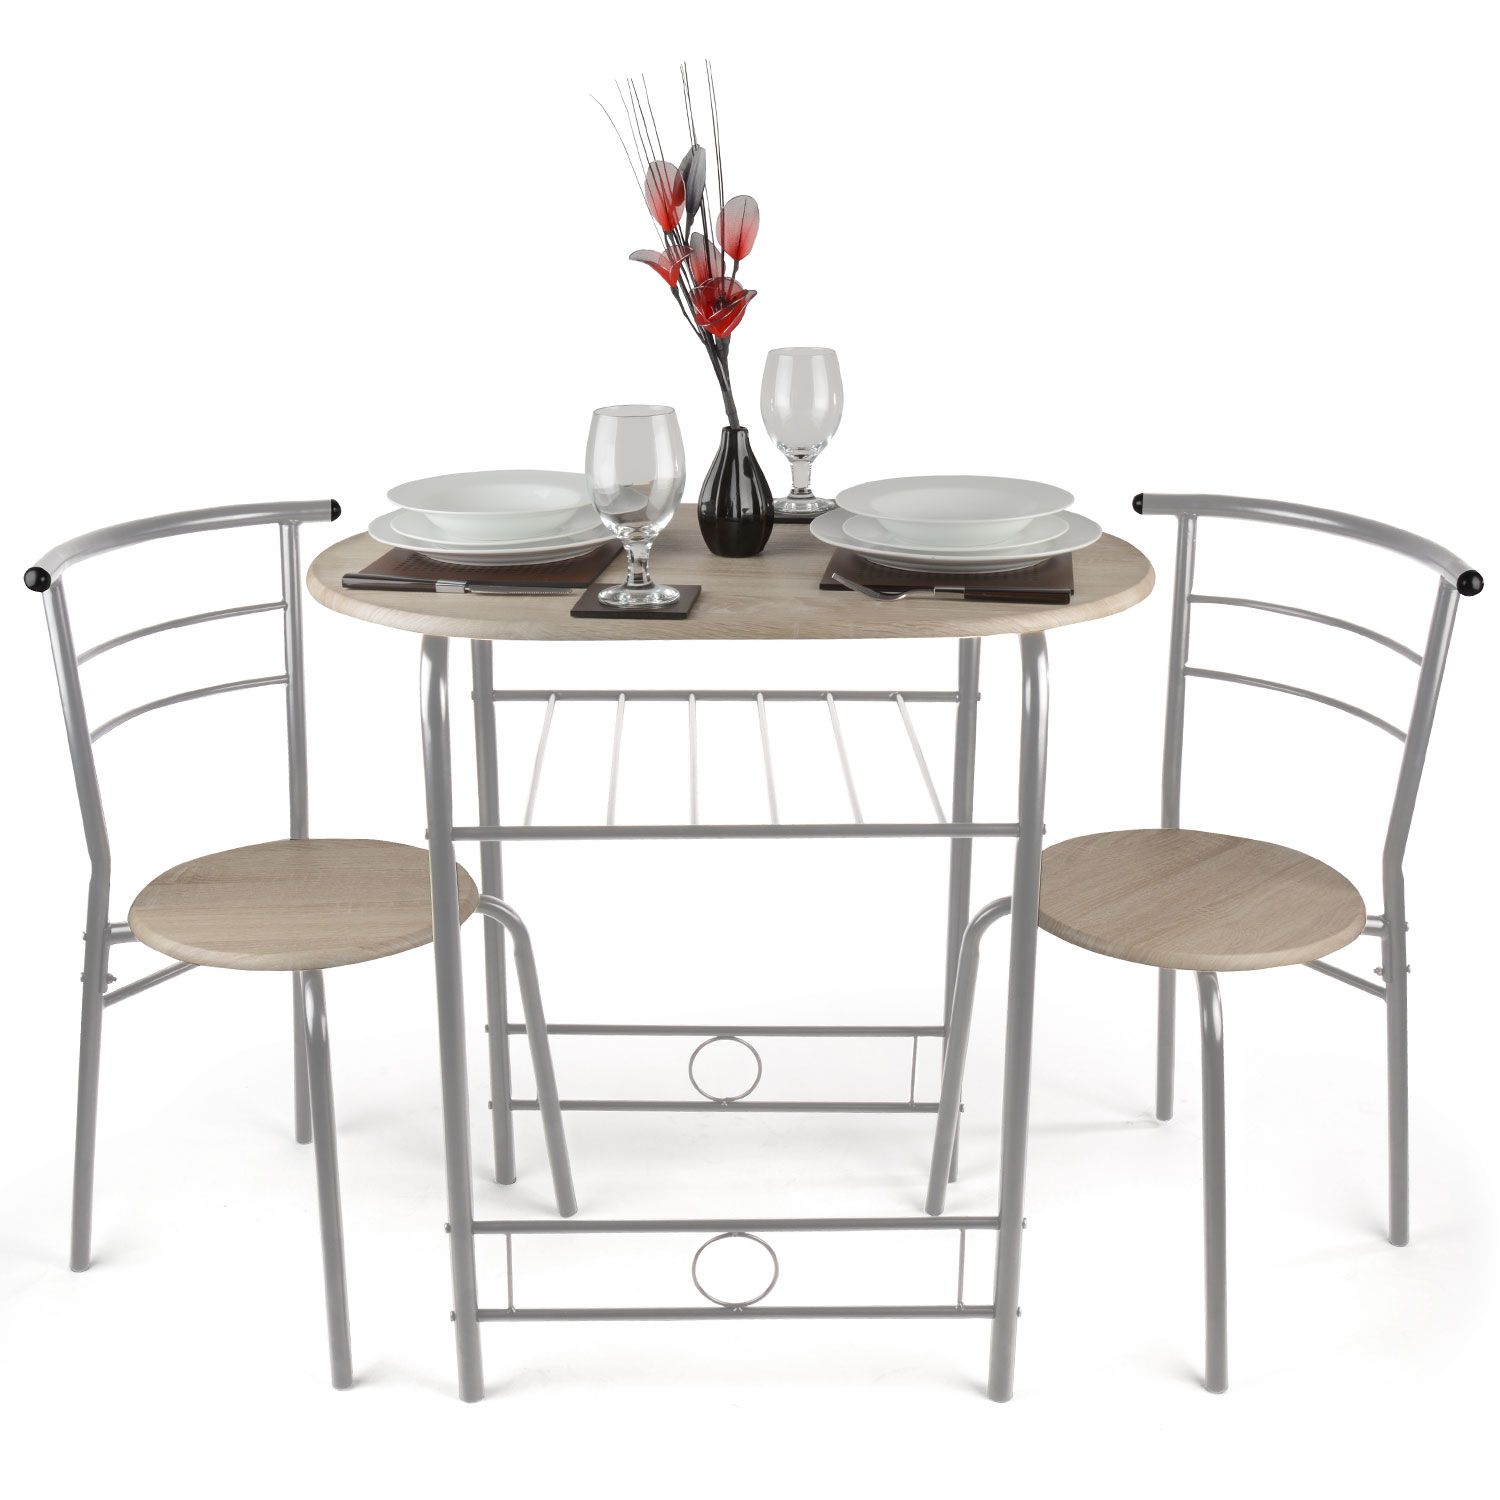 3 Piece Dining Set Breakfast Bar Kitchen Table Chairs Two Person For Favorite 3 Piece Breakfast Dining Sets (View 2 of 20)